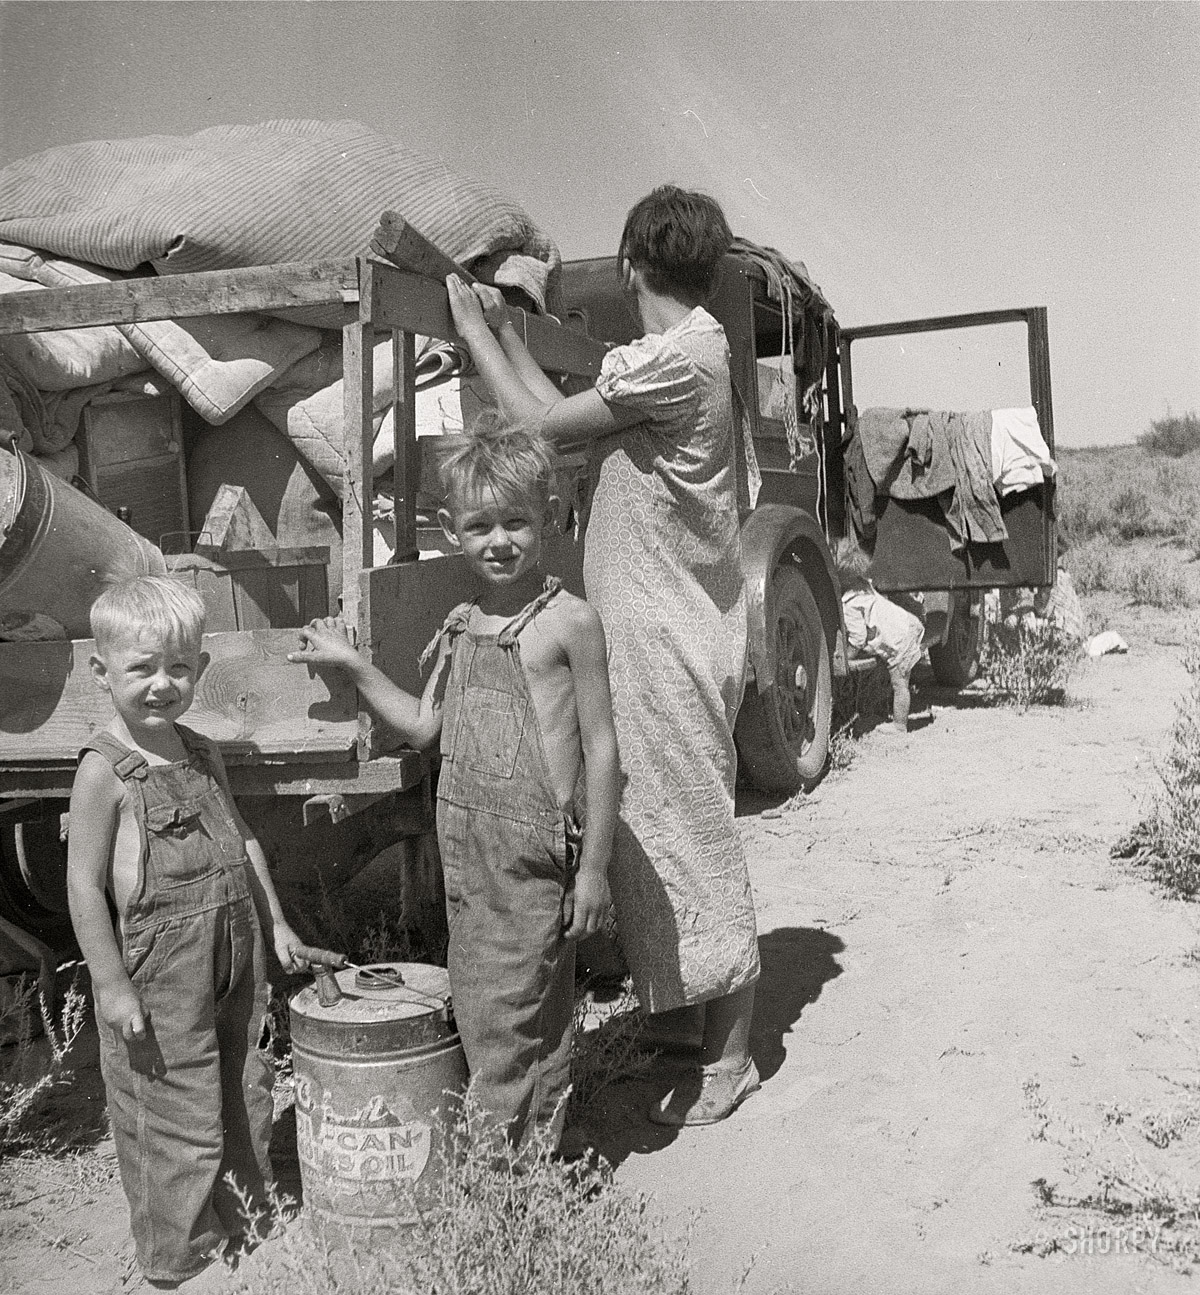 August 1936. "Part of an impoverished family of nine on a New Mexico highway. Depression refugees from Iowa. Left Iowa in 1932 because of father's ill health. Father an auto mechanic laborer, painter by trade, tubercular. Family has been on relief in Arizona but refused entry on relief rolls in Iowa to which state they wish to return. Nine children including a sick four-month-old baby. No money at all. About to sell their belongings and trailer for money to buy food. 'We don't want to go where we'll be a nuisance to anybody.'" Medium-format nitrate negative by Dorothea Lange for the Resettlement Administration. View full size.  